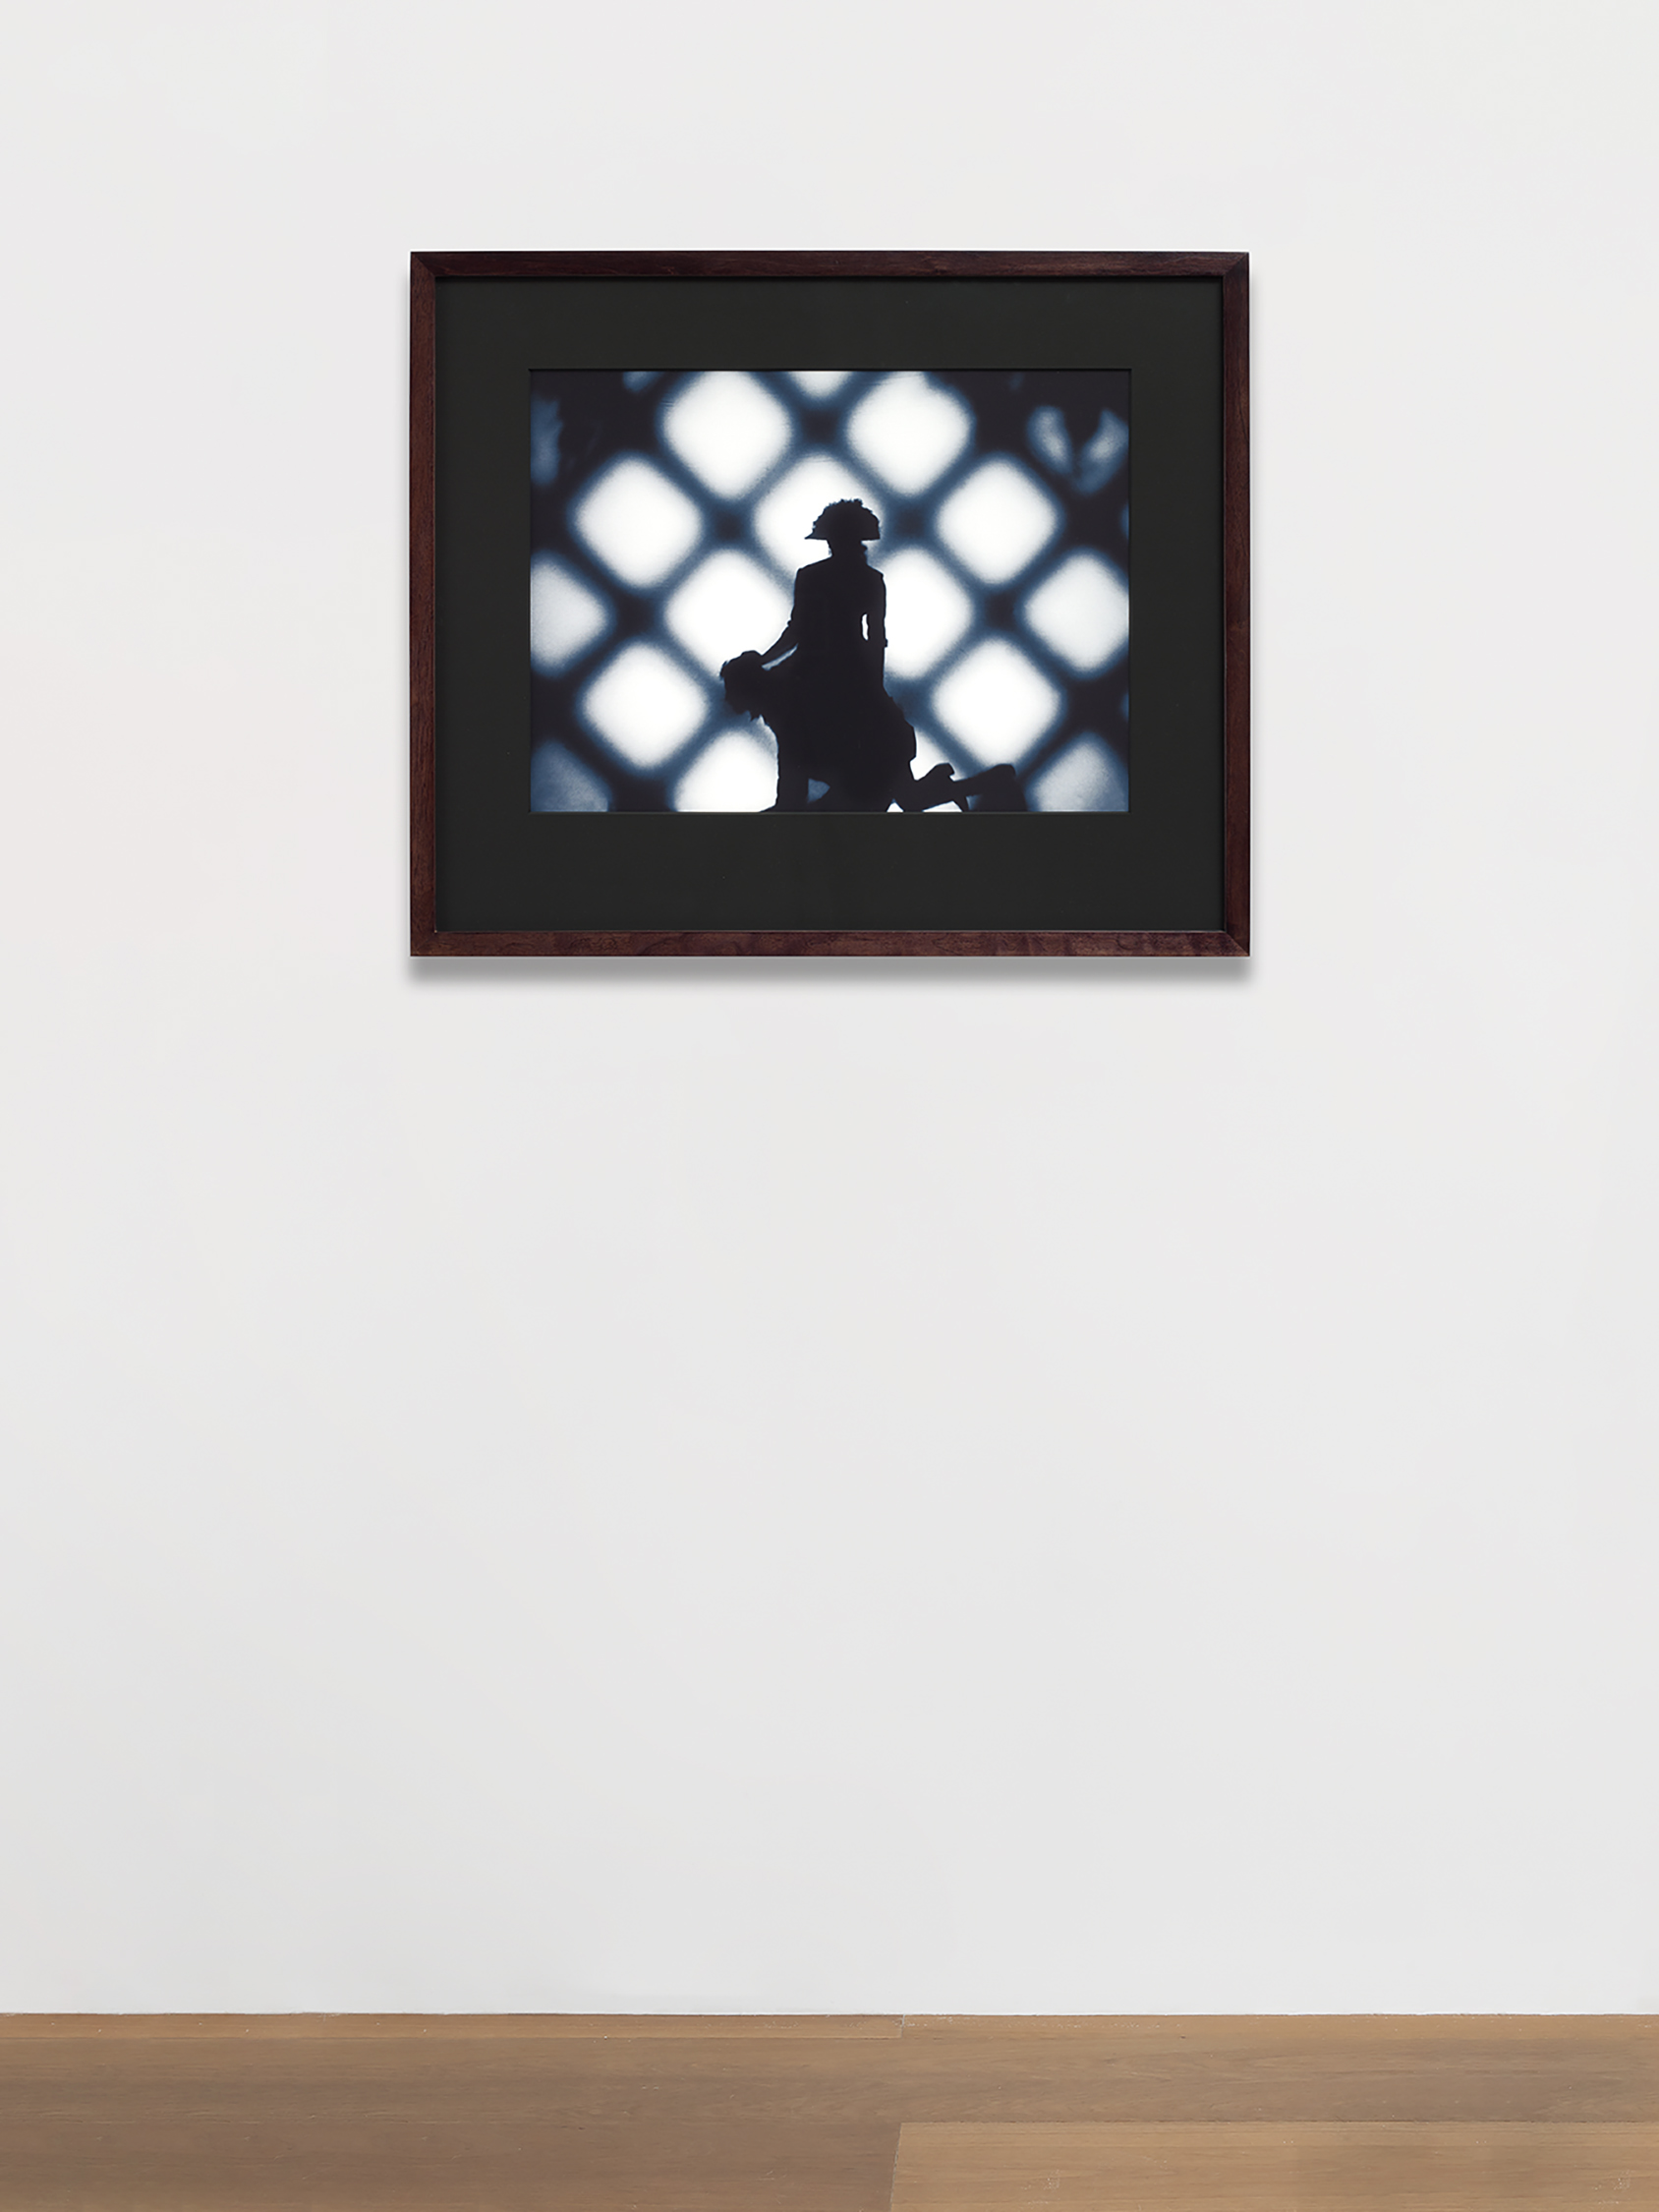 Image of Carrie Mae Weems' Untitled Woman As Napoleon Riding Atop A Man From the Louisiana Project, 2003